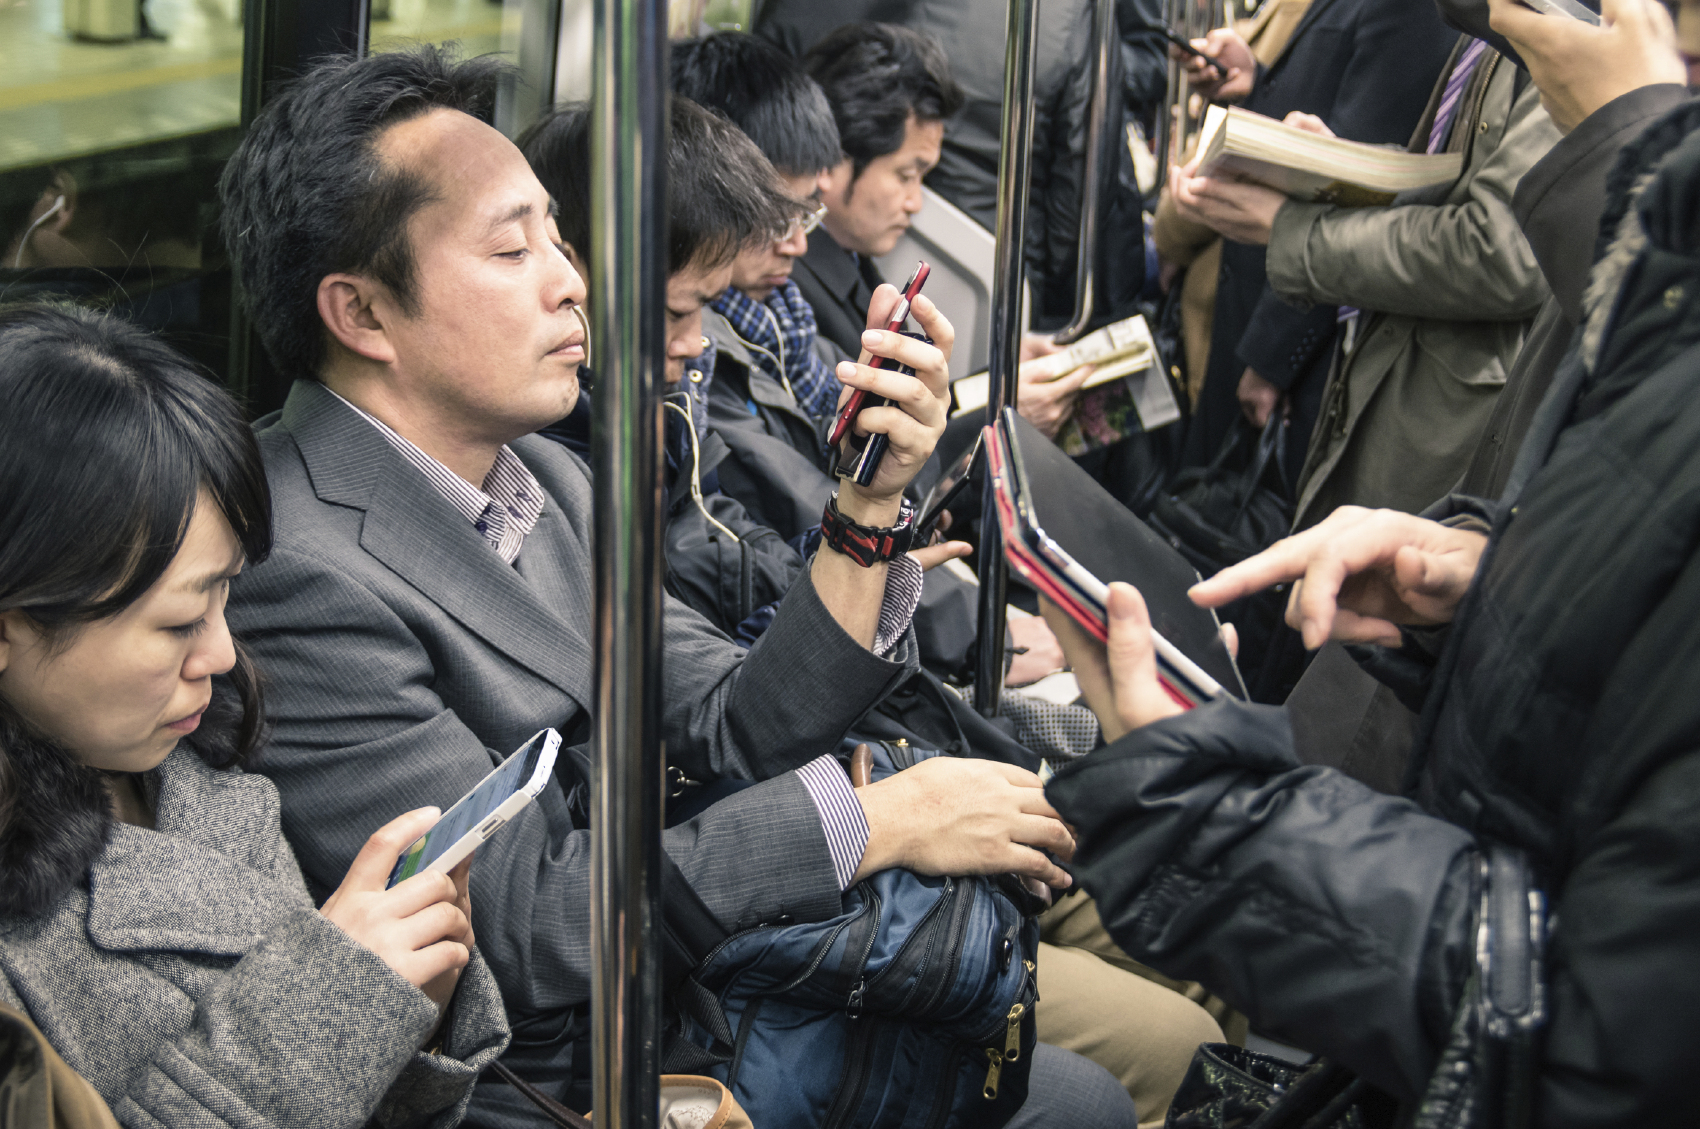 TOKYO -MARCH 2, 2015: people busy with smartphones and tablets i